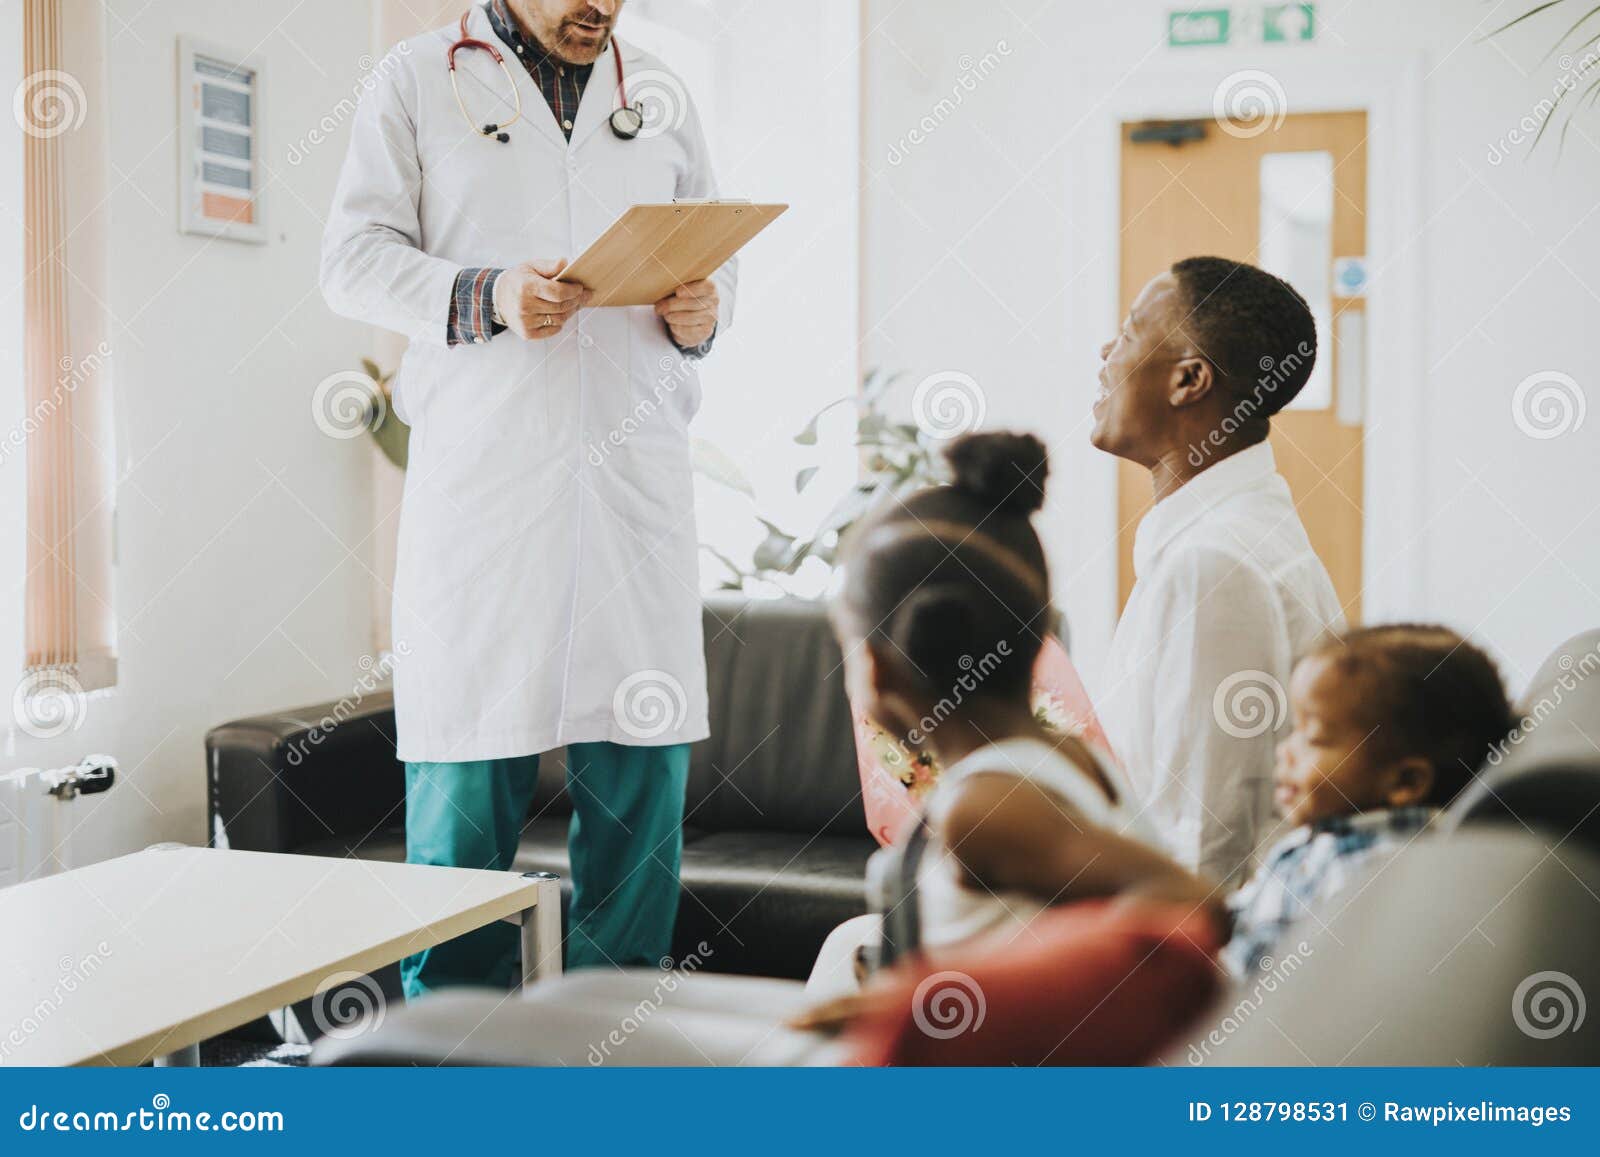 discharged patient talking to a doctor